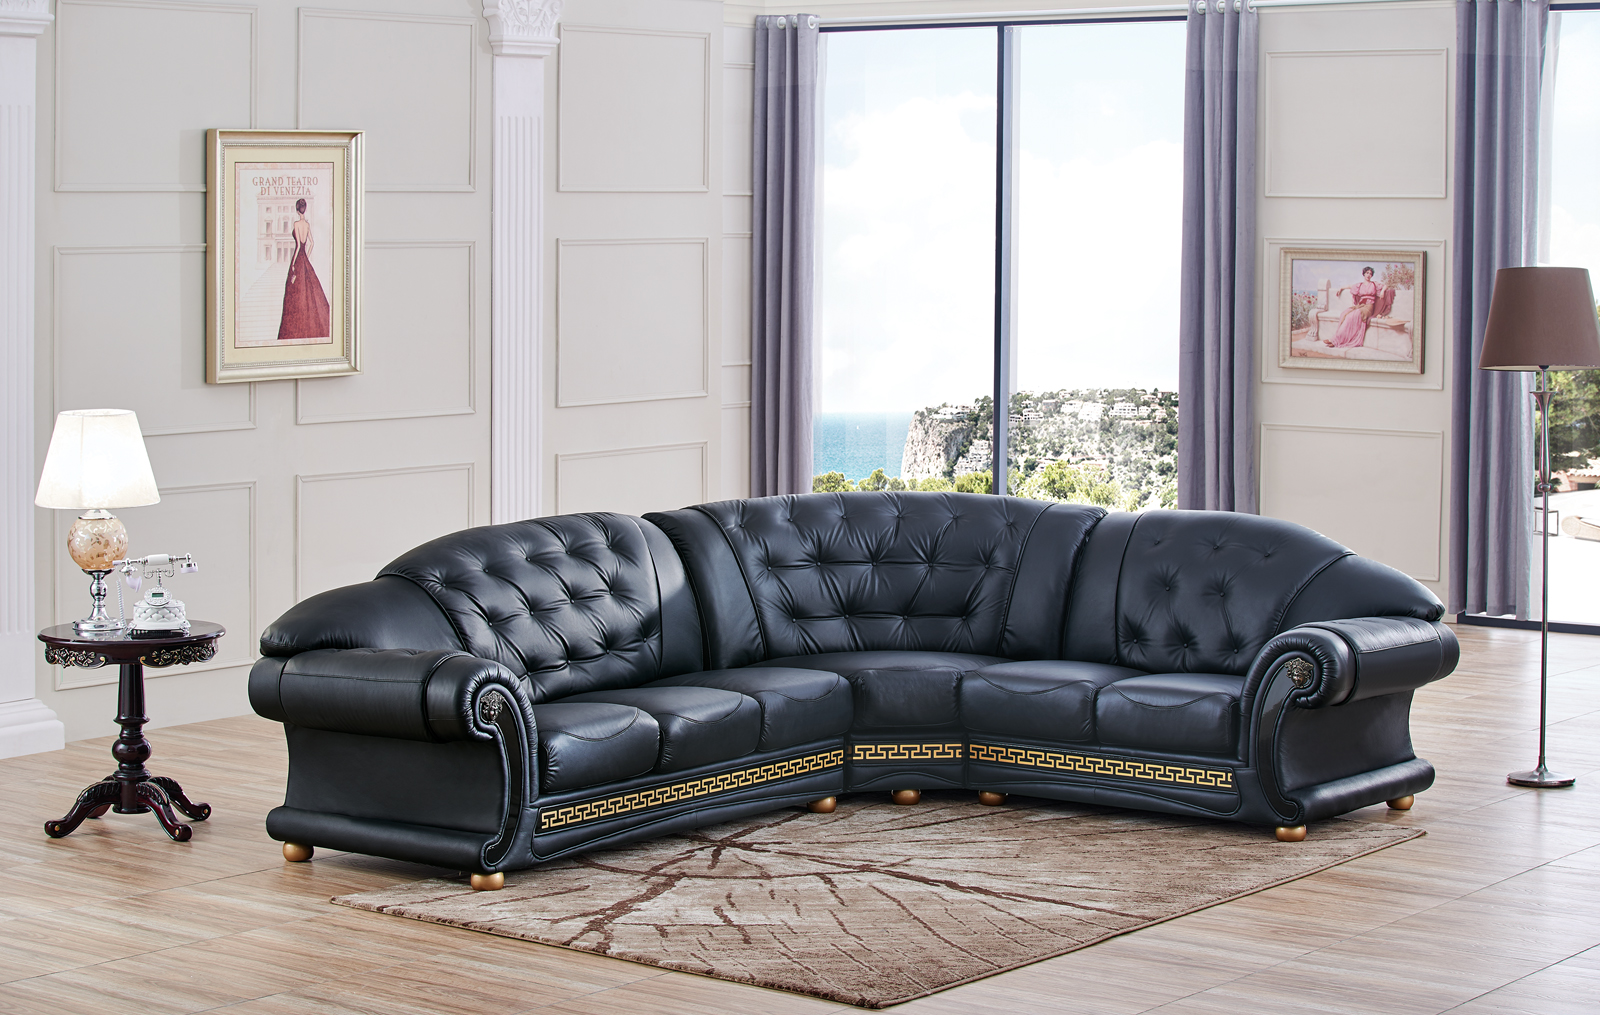 Living Room Furniture Swatches Apolo Sectional Black